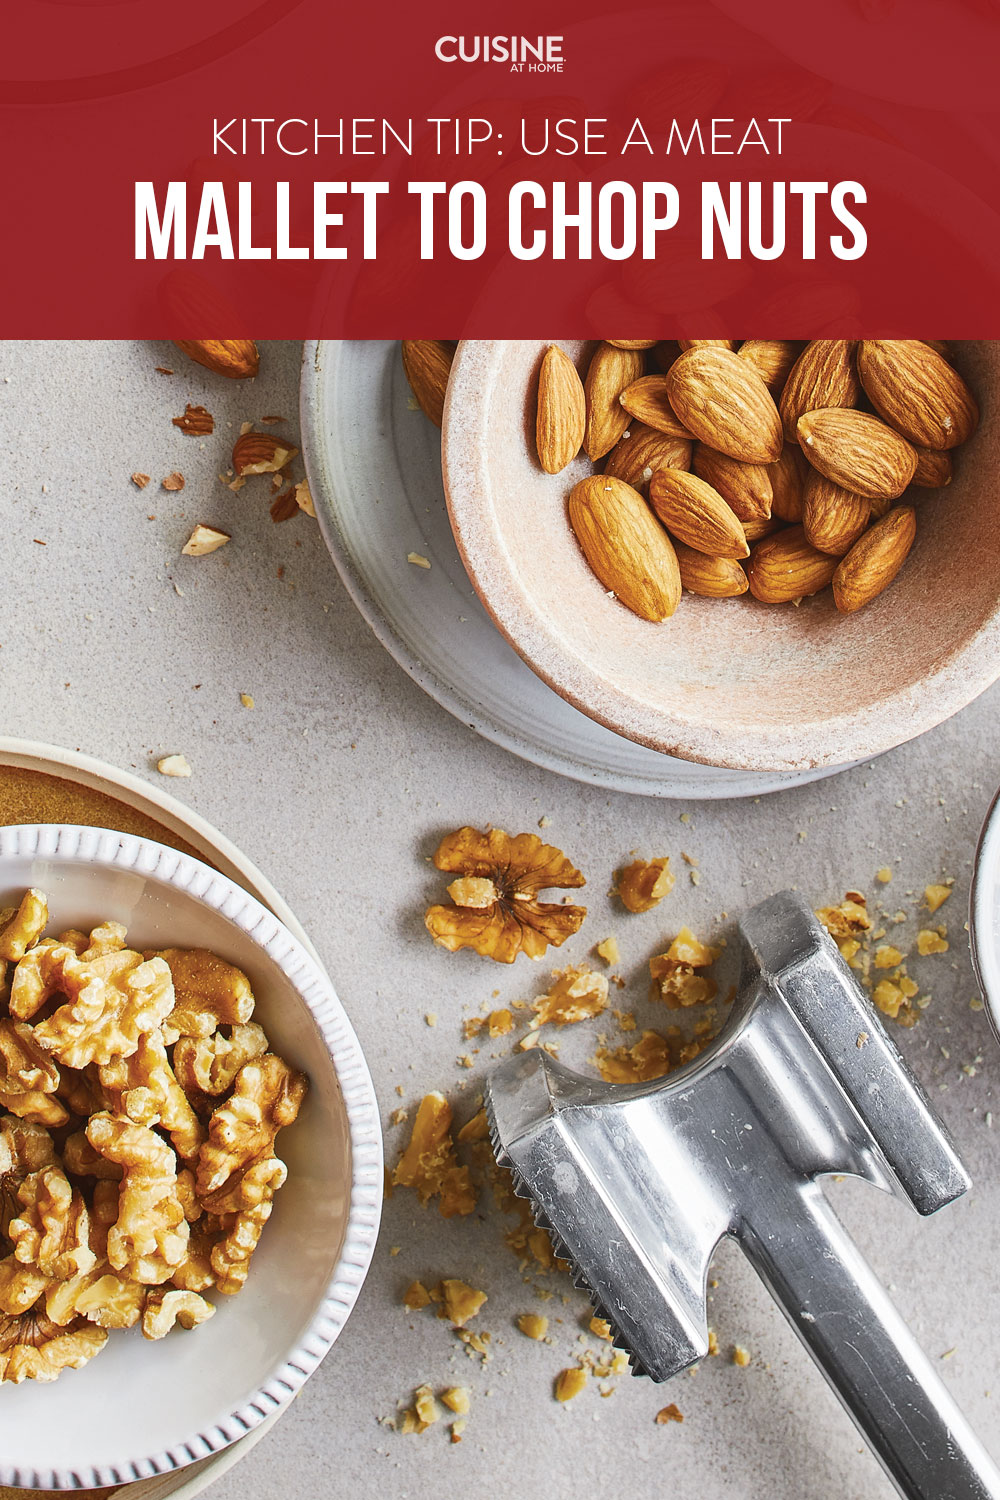 Surprising things you can use to chop nuts when you don't have a